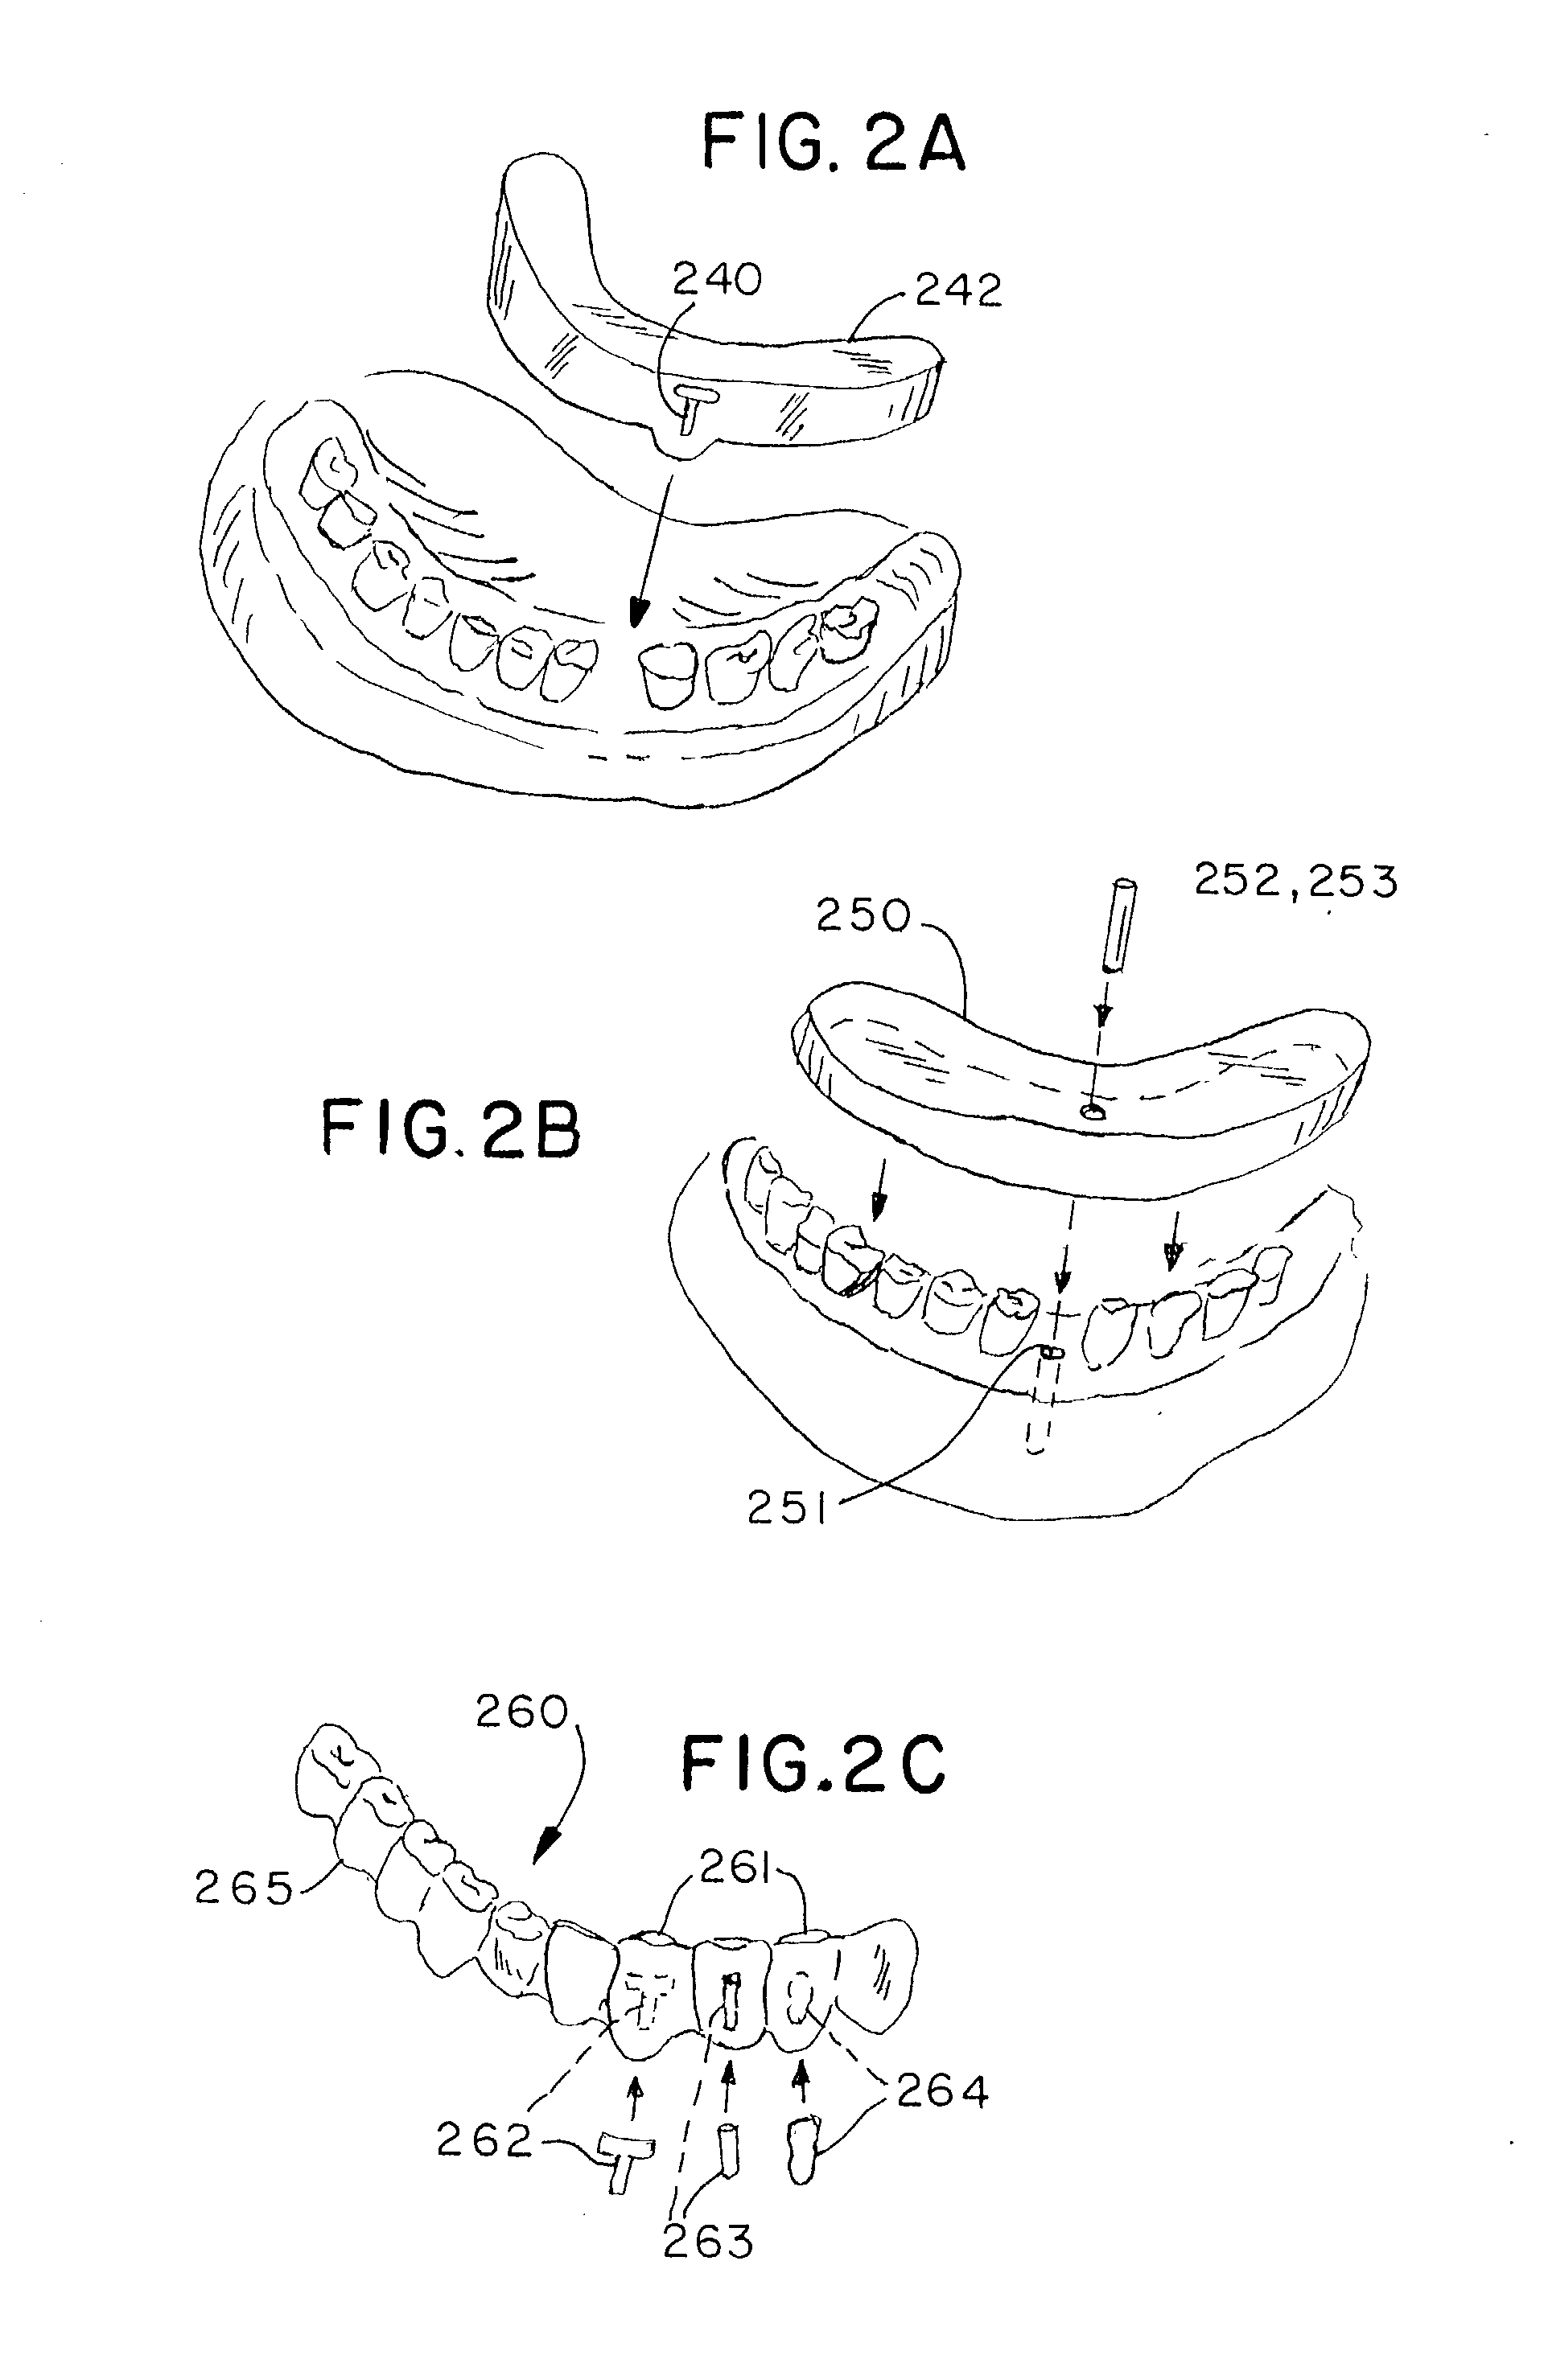 Stable dental analog systems